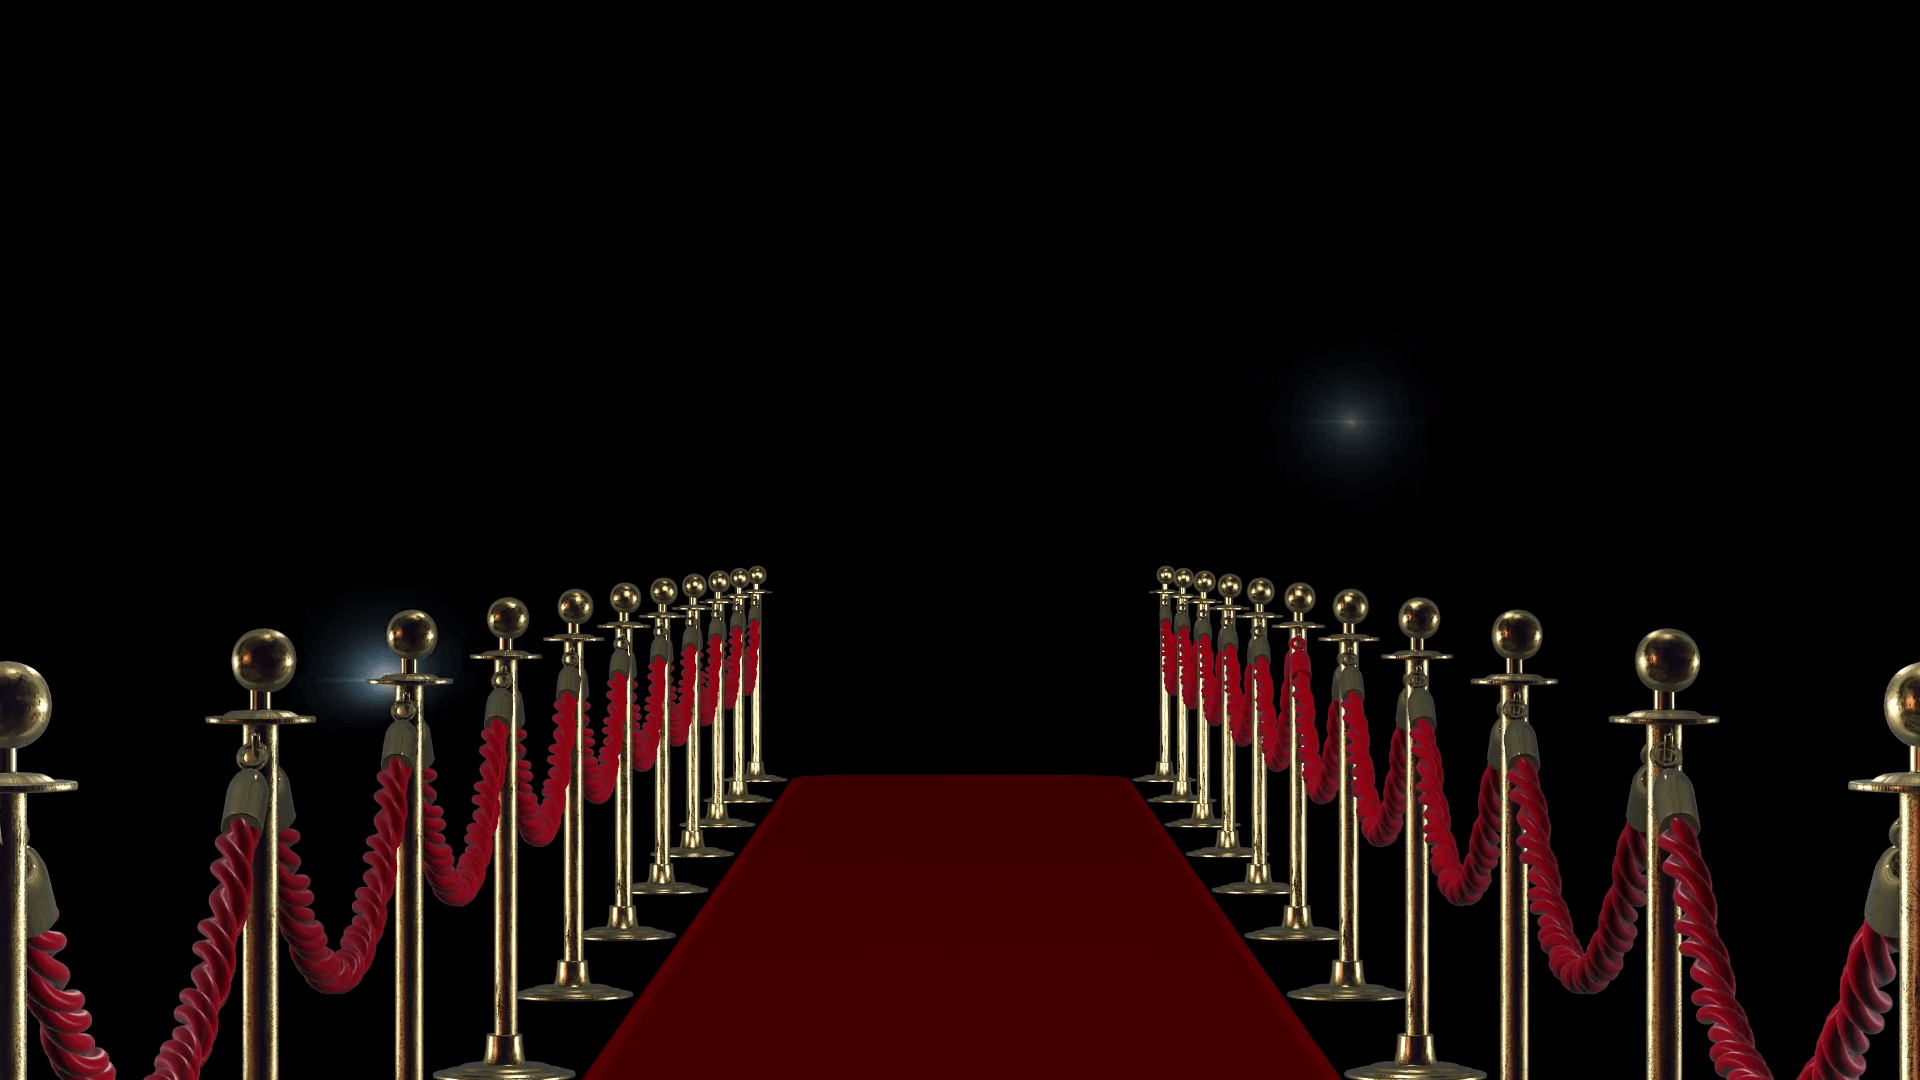 Red carpet on the background of camera flashes Motion Background